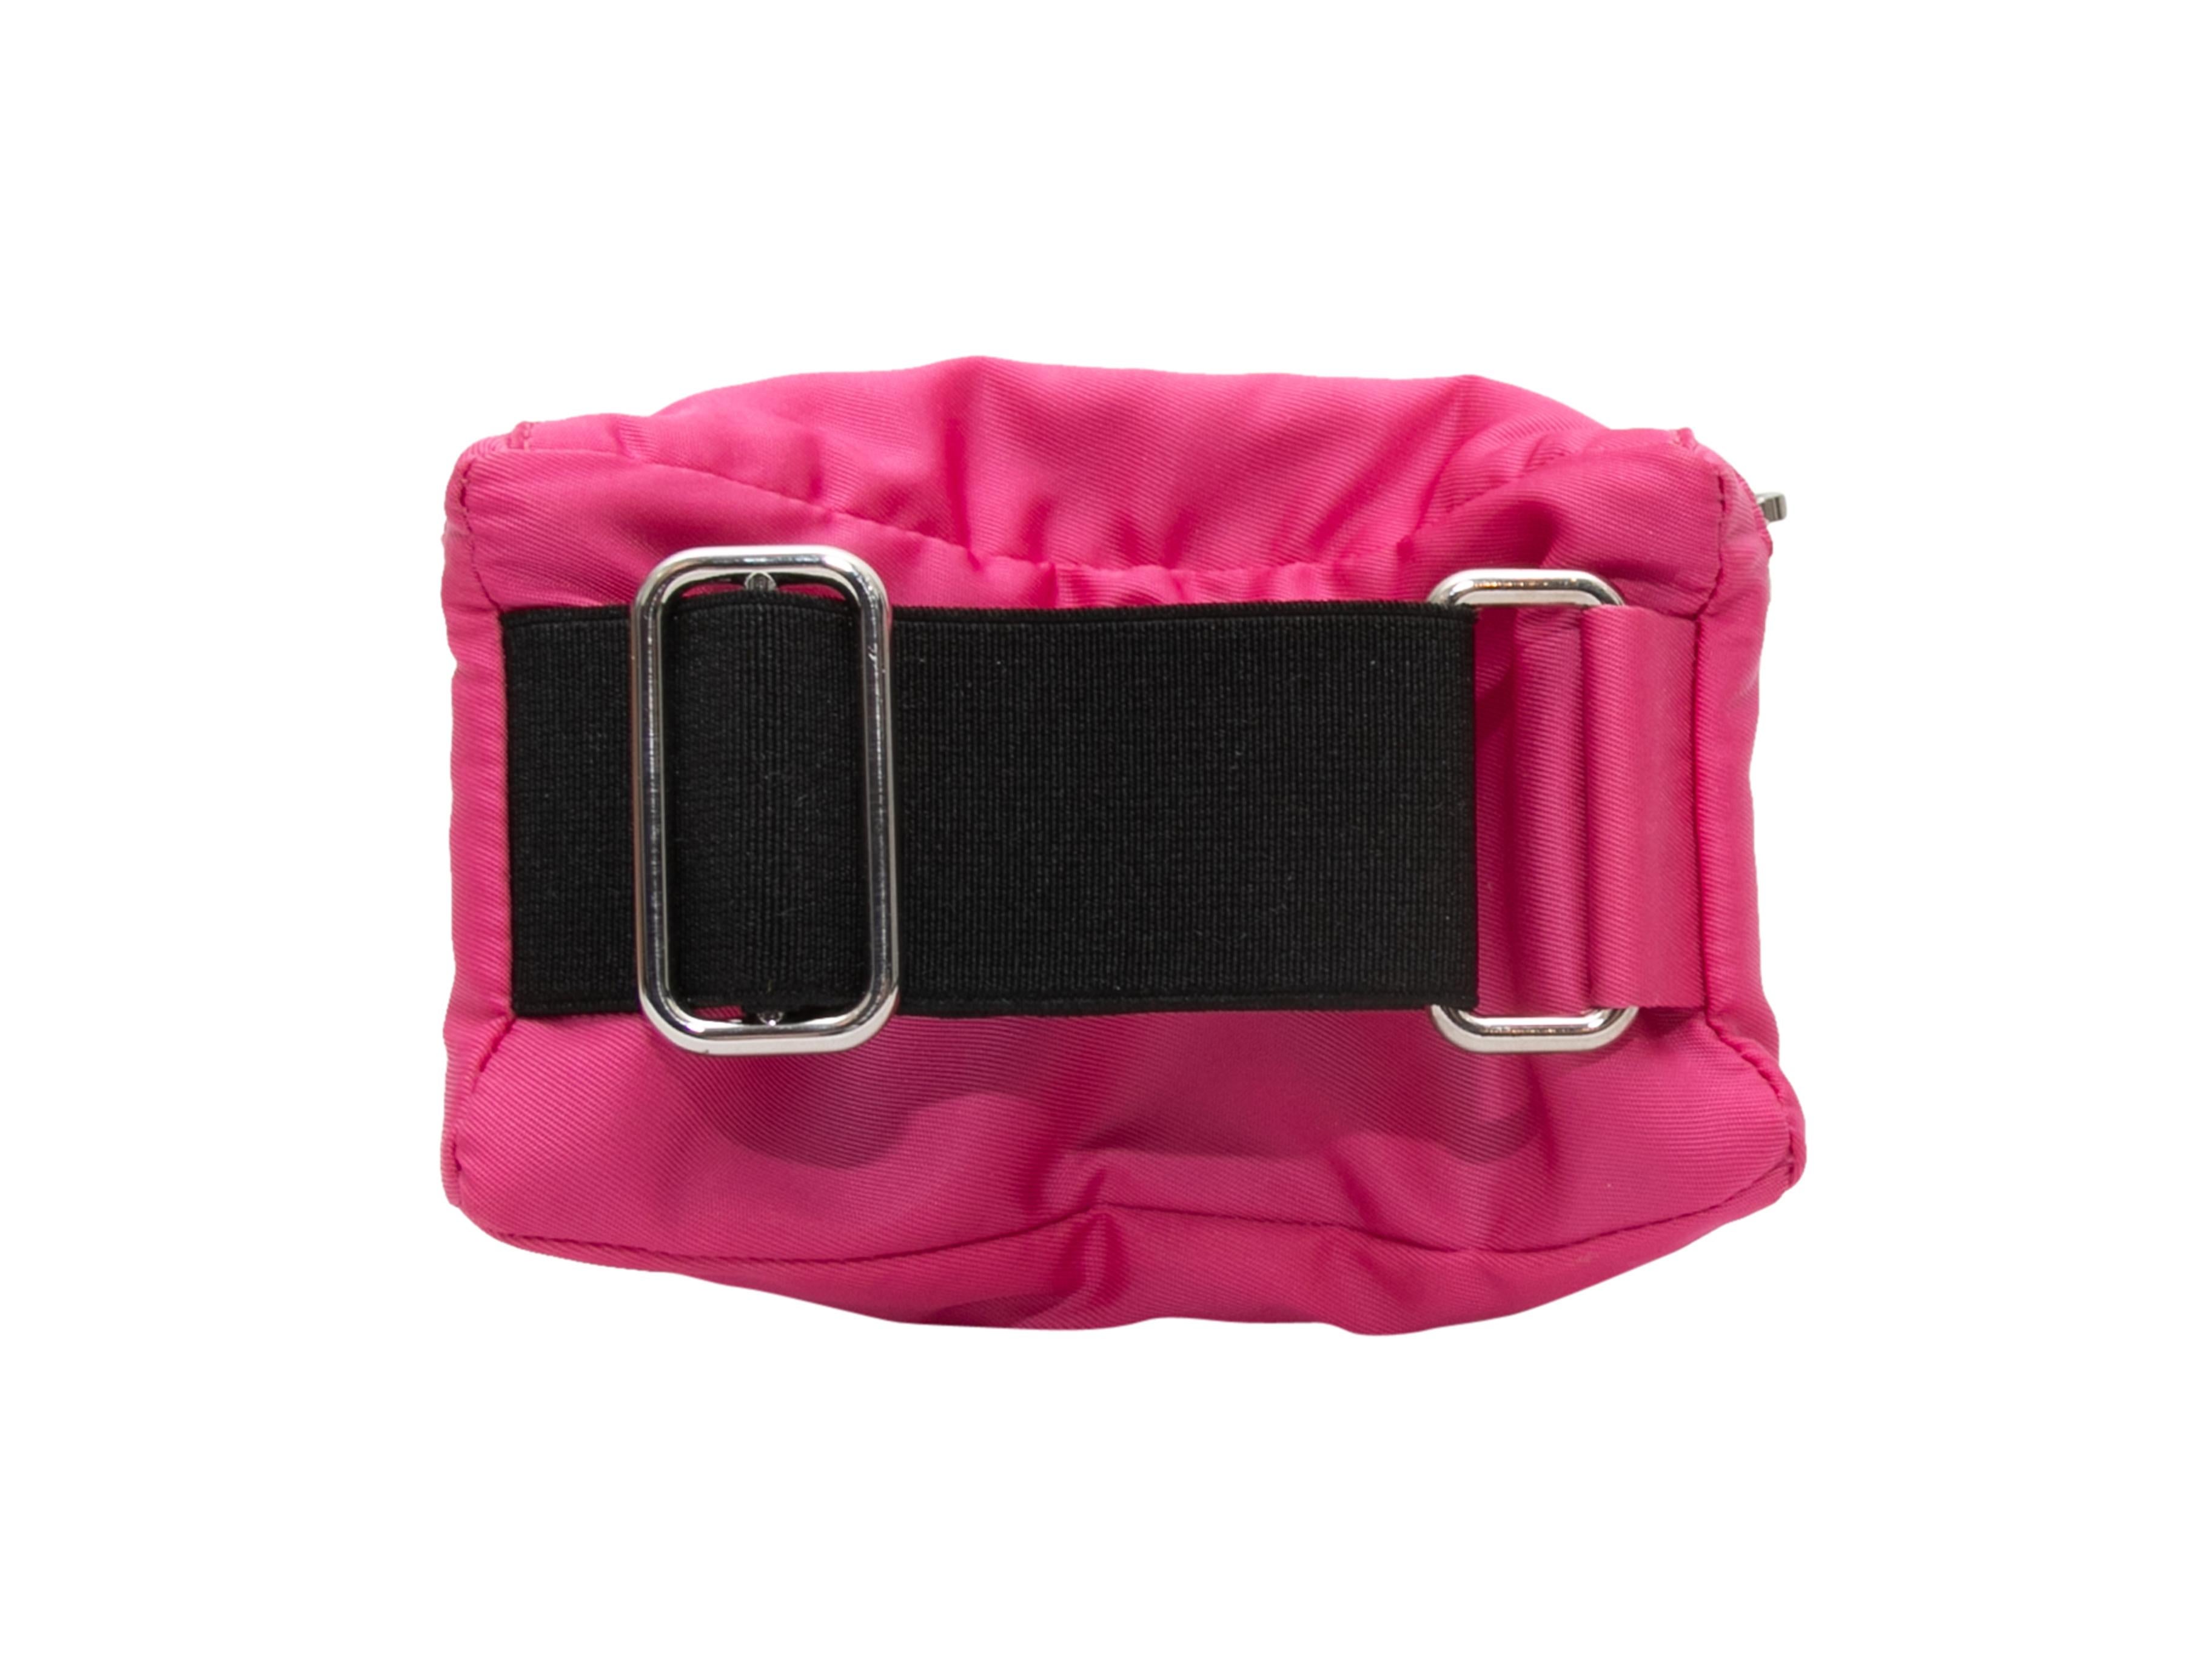 Pink & Black Prada Re-Nylon Wristlet Pouch In Good Condition For Sale In New York, NY